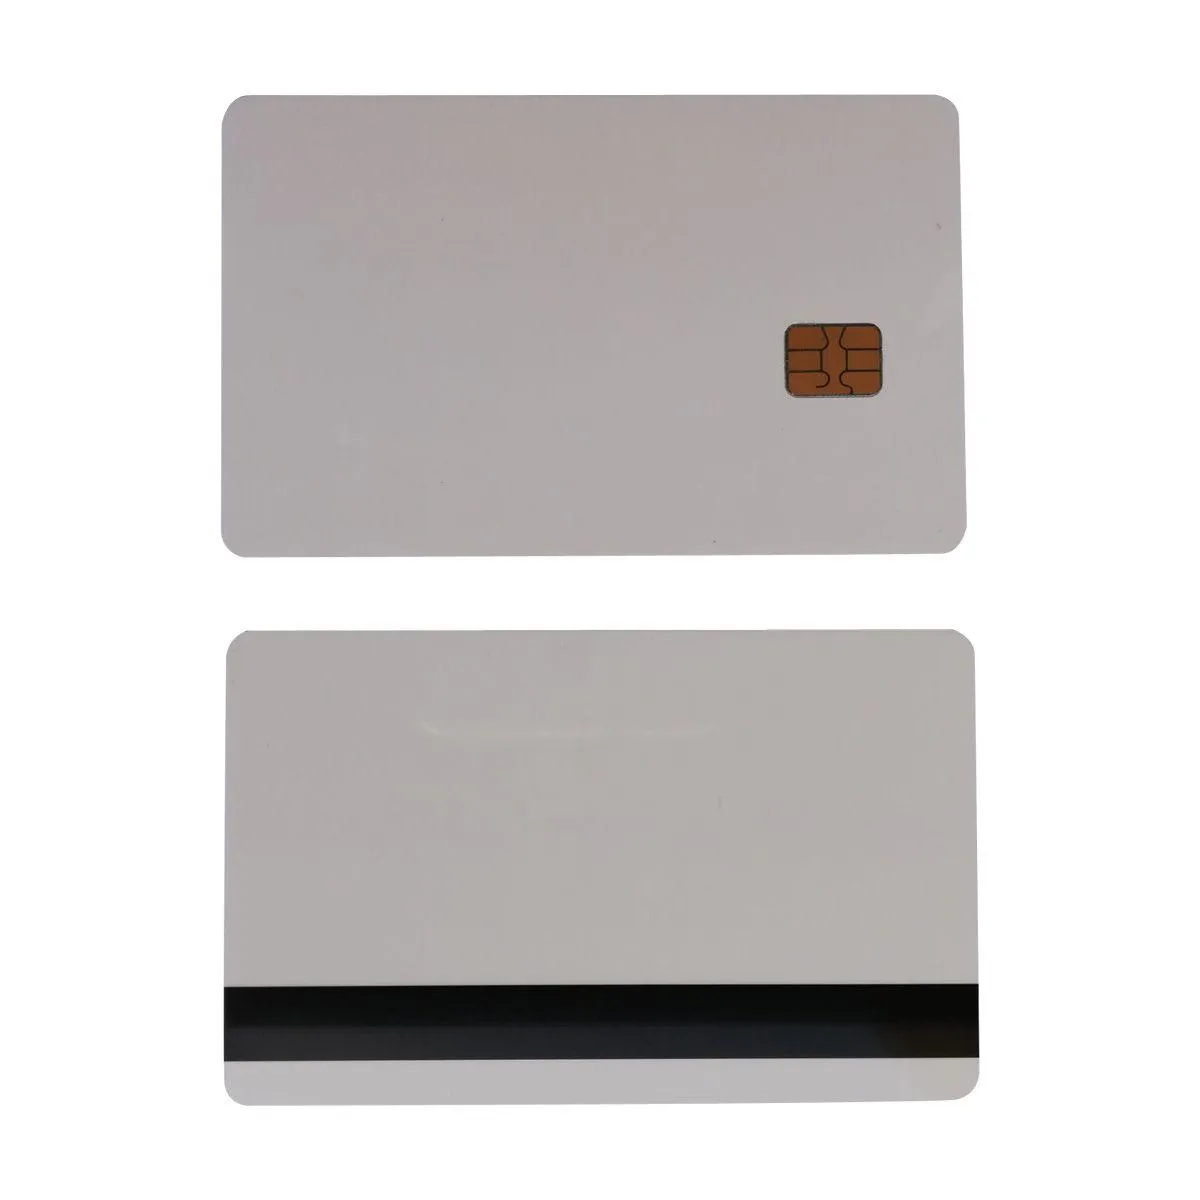 Access Control Card 10Pcs White Sle4442 Contact Chip Pvc Smart With 8.4Mm Hico Magnetic Stripe Drop Delivery Security Surveillance In Dh6B7